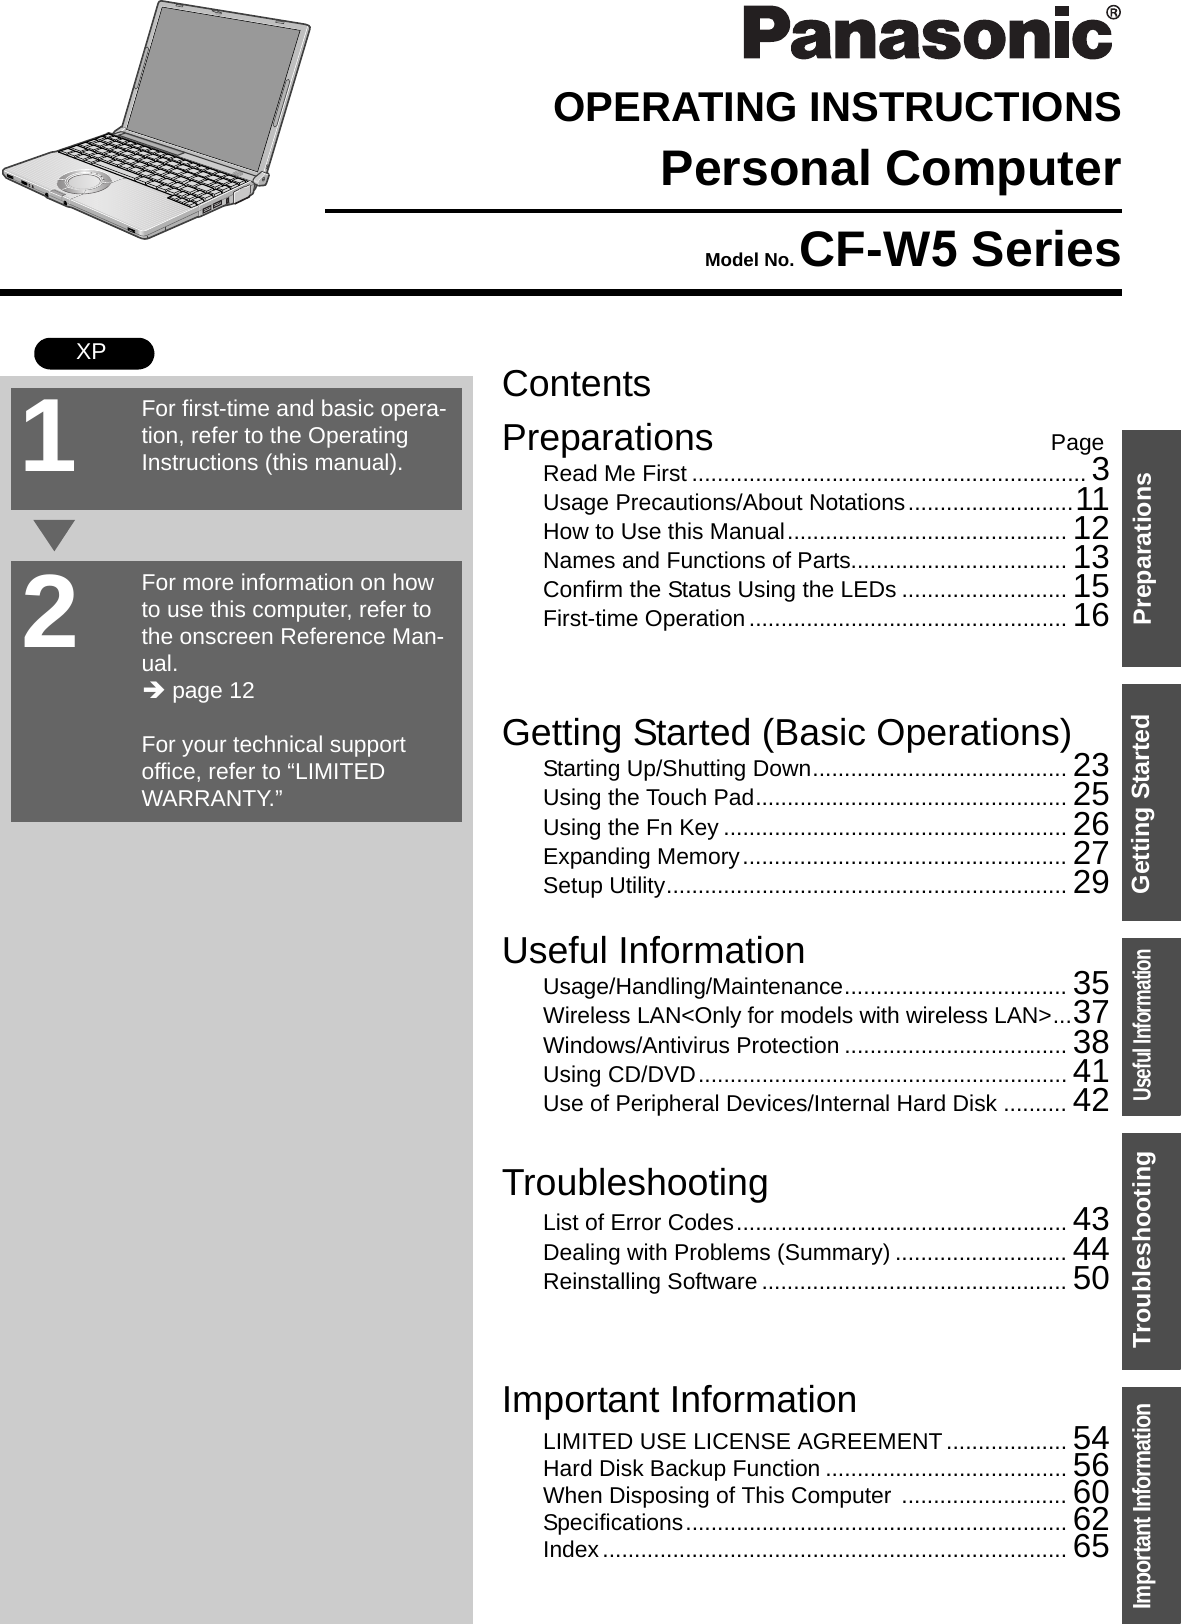 ContentsPreparations PageGetting Started (Basic Operations)TroubleshootingUseful InformationImportant InformationPreparationsGetting StartedUseful InformationTroubleshootingImportant InformationOPERATING INSTRUCTIONSPersonal ComputerModel No. CF-W5 SeriesXPRead Me First .............................................................. 3Usage Precautions/About Notations..........................11How to Use this Manual............................................ 12Names and Functions of Parts.................................. 13Confirm the Status Using the LEDs .......................... 15First-time Operation.................................................. 16Starting Up/Shutting Down........................................ 23Using the Touch Pad................................................. 25Using the Fn Key ...................................................... 26Expanding Memory................................................... 27Setup Utility............................................................... 29Usage/Handling/Maintenance................................... 35Wireless LAN&lt;Only for models with wireless LAN&gt;...37Windows/Antivirus Protection ................................... 38Using CD/DVD.......................................................... 41Use of Peripheral Devices/Internal Hard Disk .......... 42List of Error Codes.................................................... 43Dealing with Problems (Summary) ........................... 44Reinstalling Software ................................................ 50LIMITED USE LICENSE AGREEMENT ................... 54Hard Disk Backup Function ...................................... 56When Disposing of This Computer .......................... 60Specifications............................................................ 62Index......................................................................... 65For first-time and basic opera-tion, refer to the Operating Instructions (this manual).For more information on how to use this computer, refer to the onscreen Reference Man-ual.Î page 12For your technical support office, refer to “LIMITED WARRANTY.”21